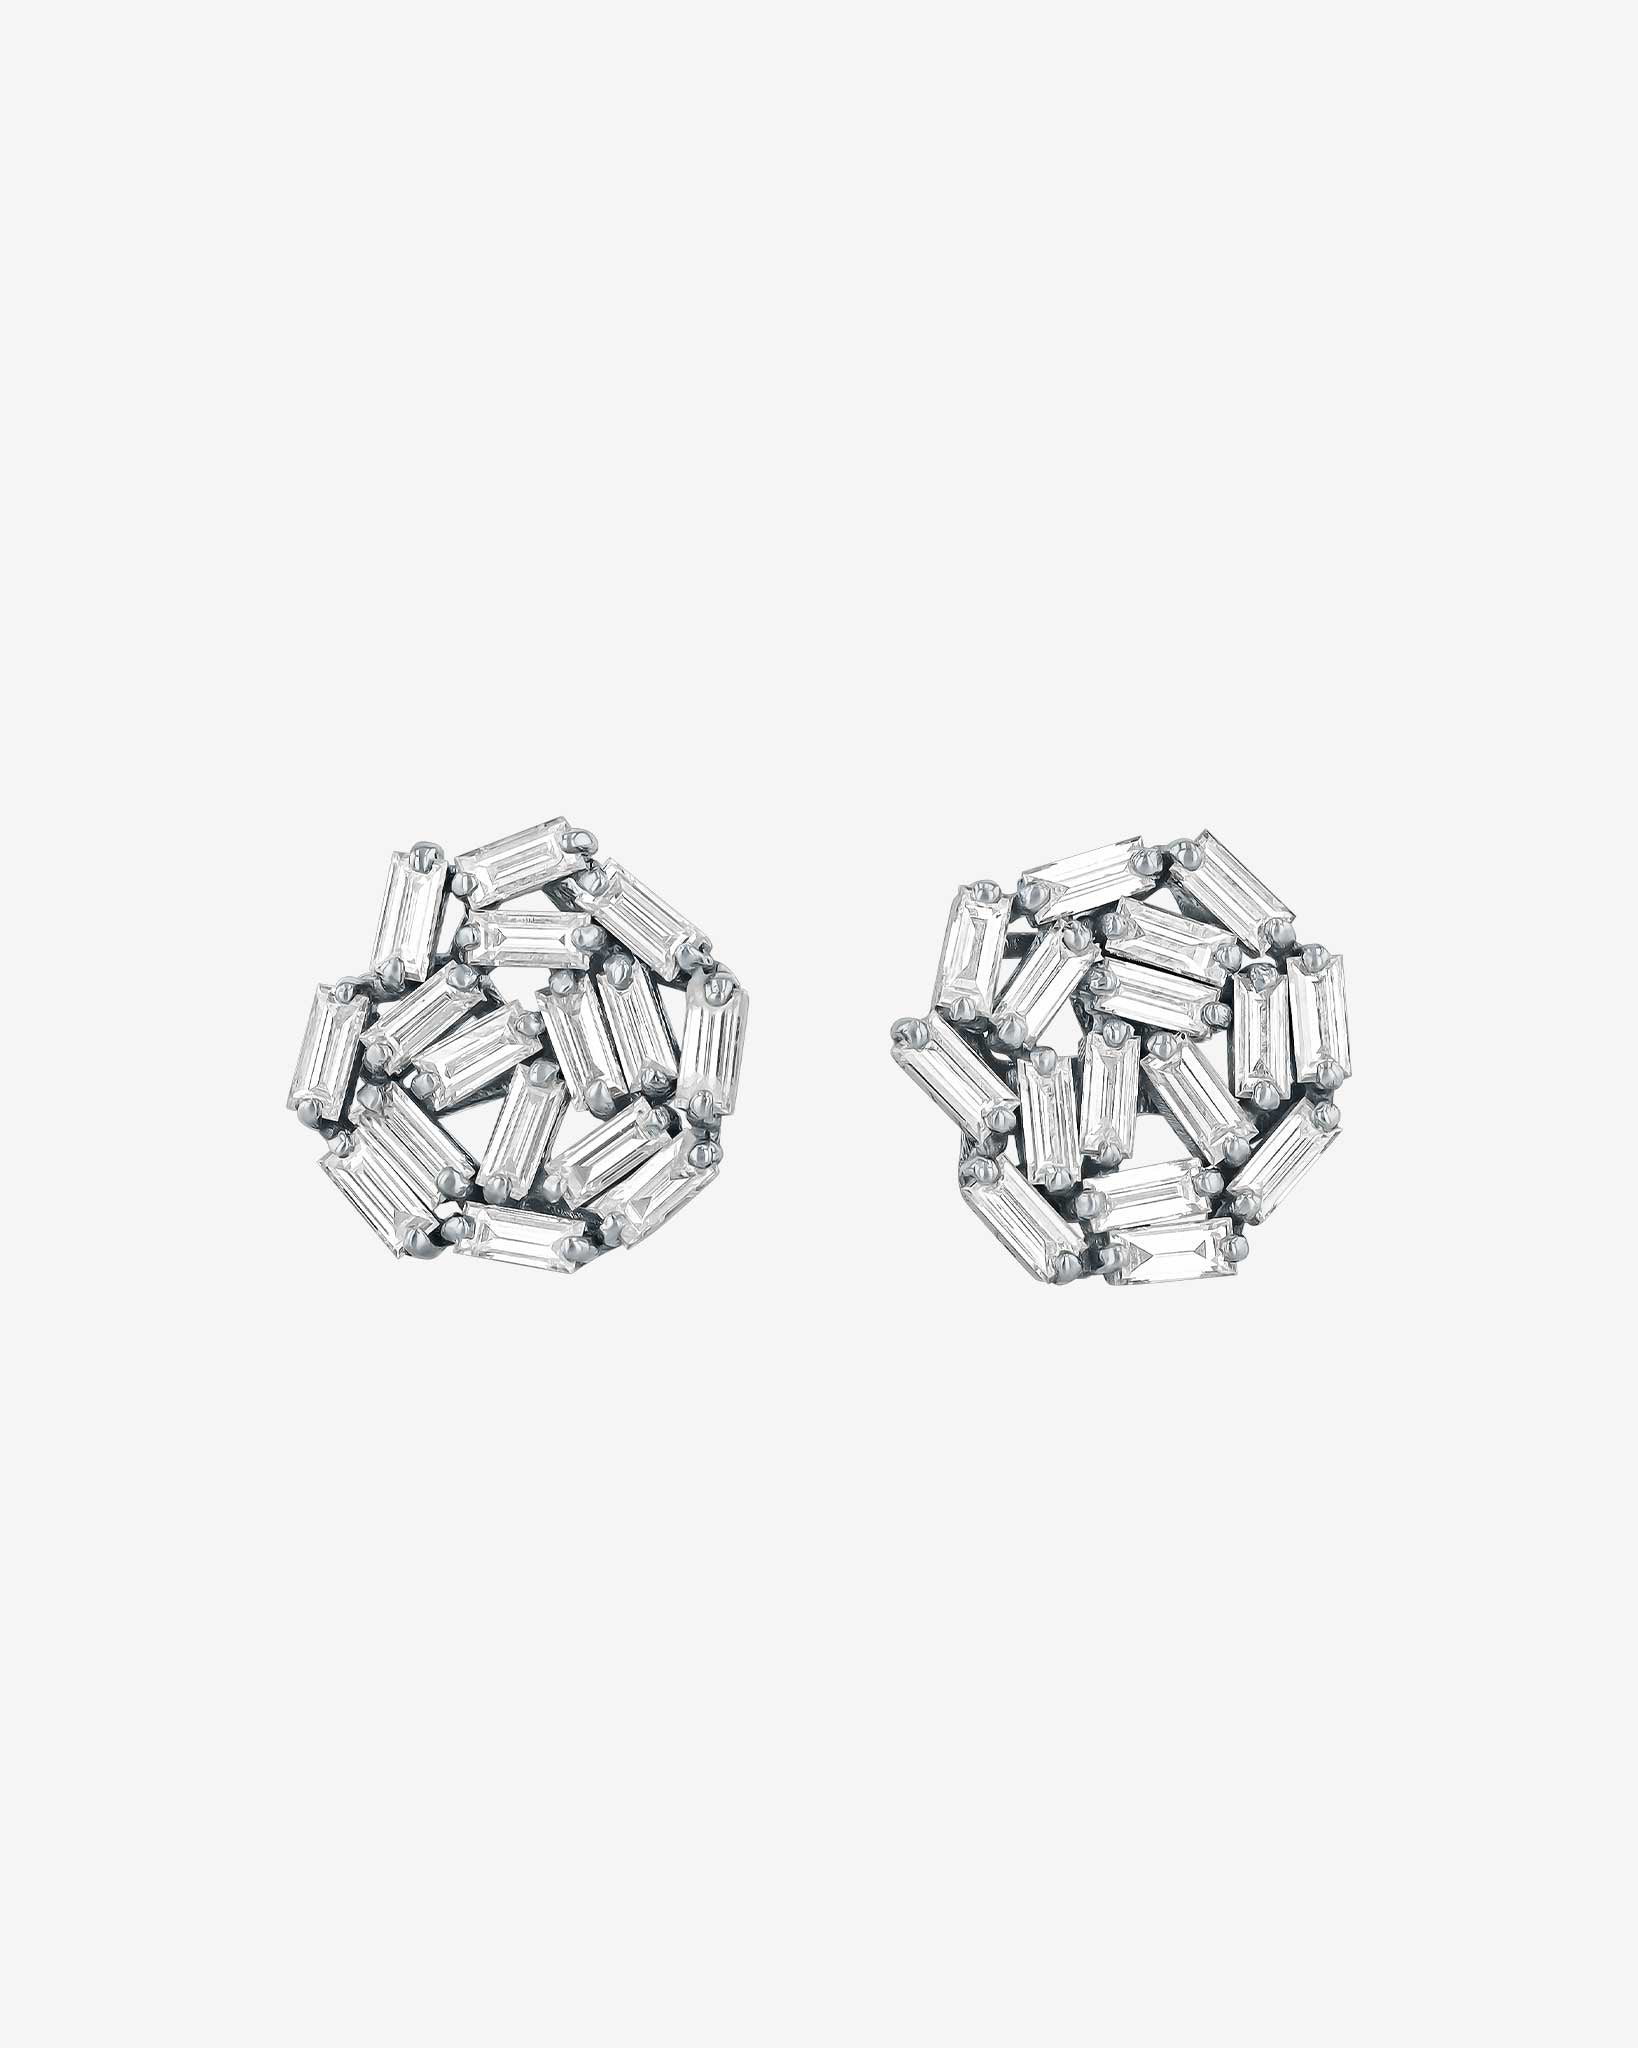 Suzanne Kalan Classic Diamond Round Baguette Studs in 18k white gold